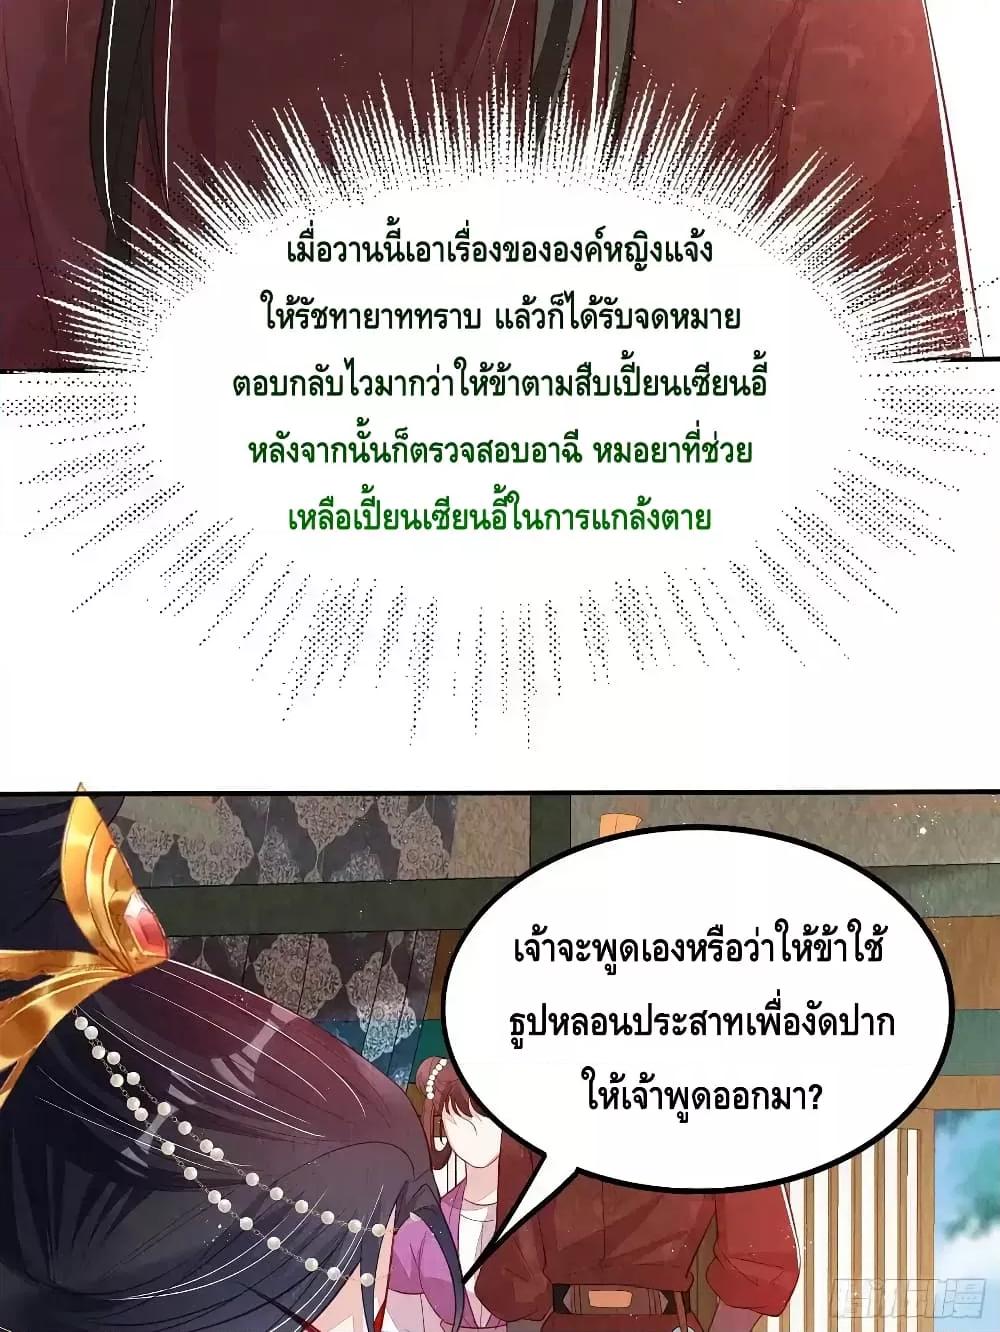 After I Bloom, a Hundred Flowers ตอนที่ 69 (19)